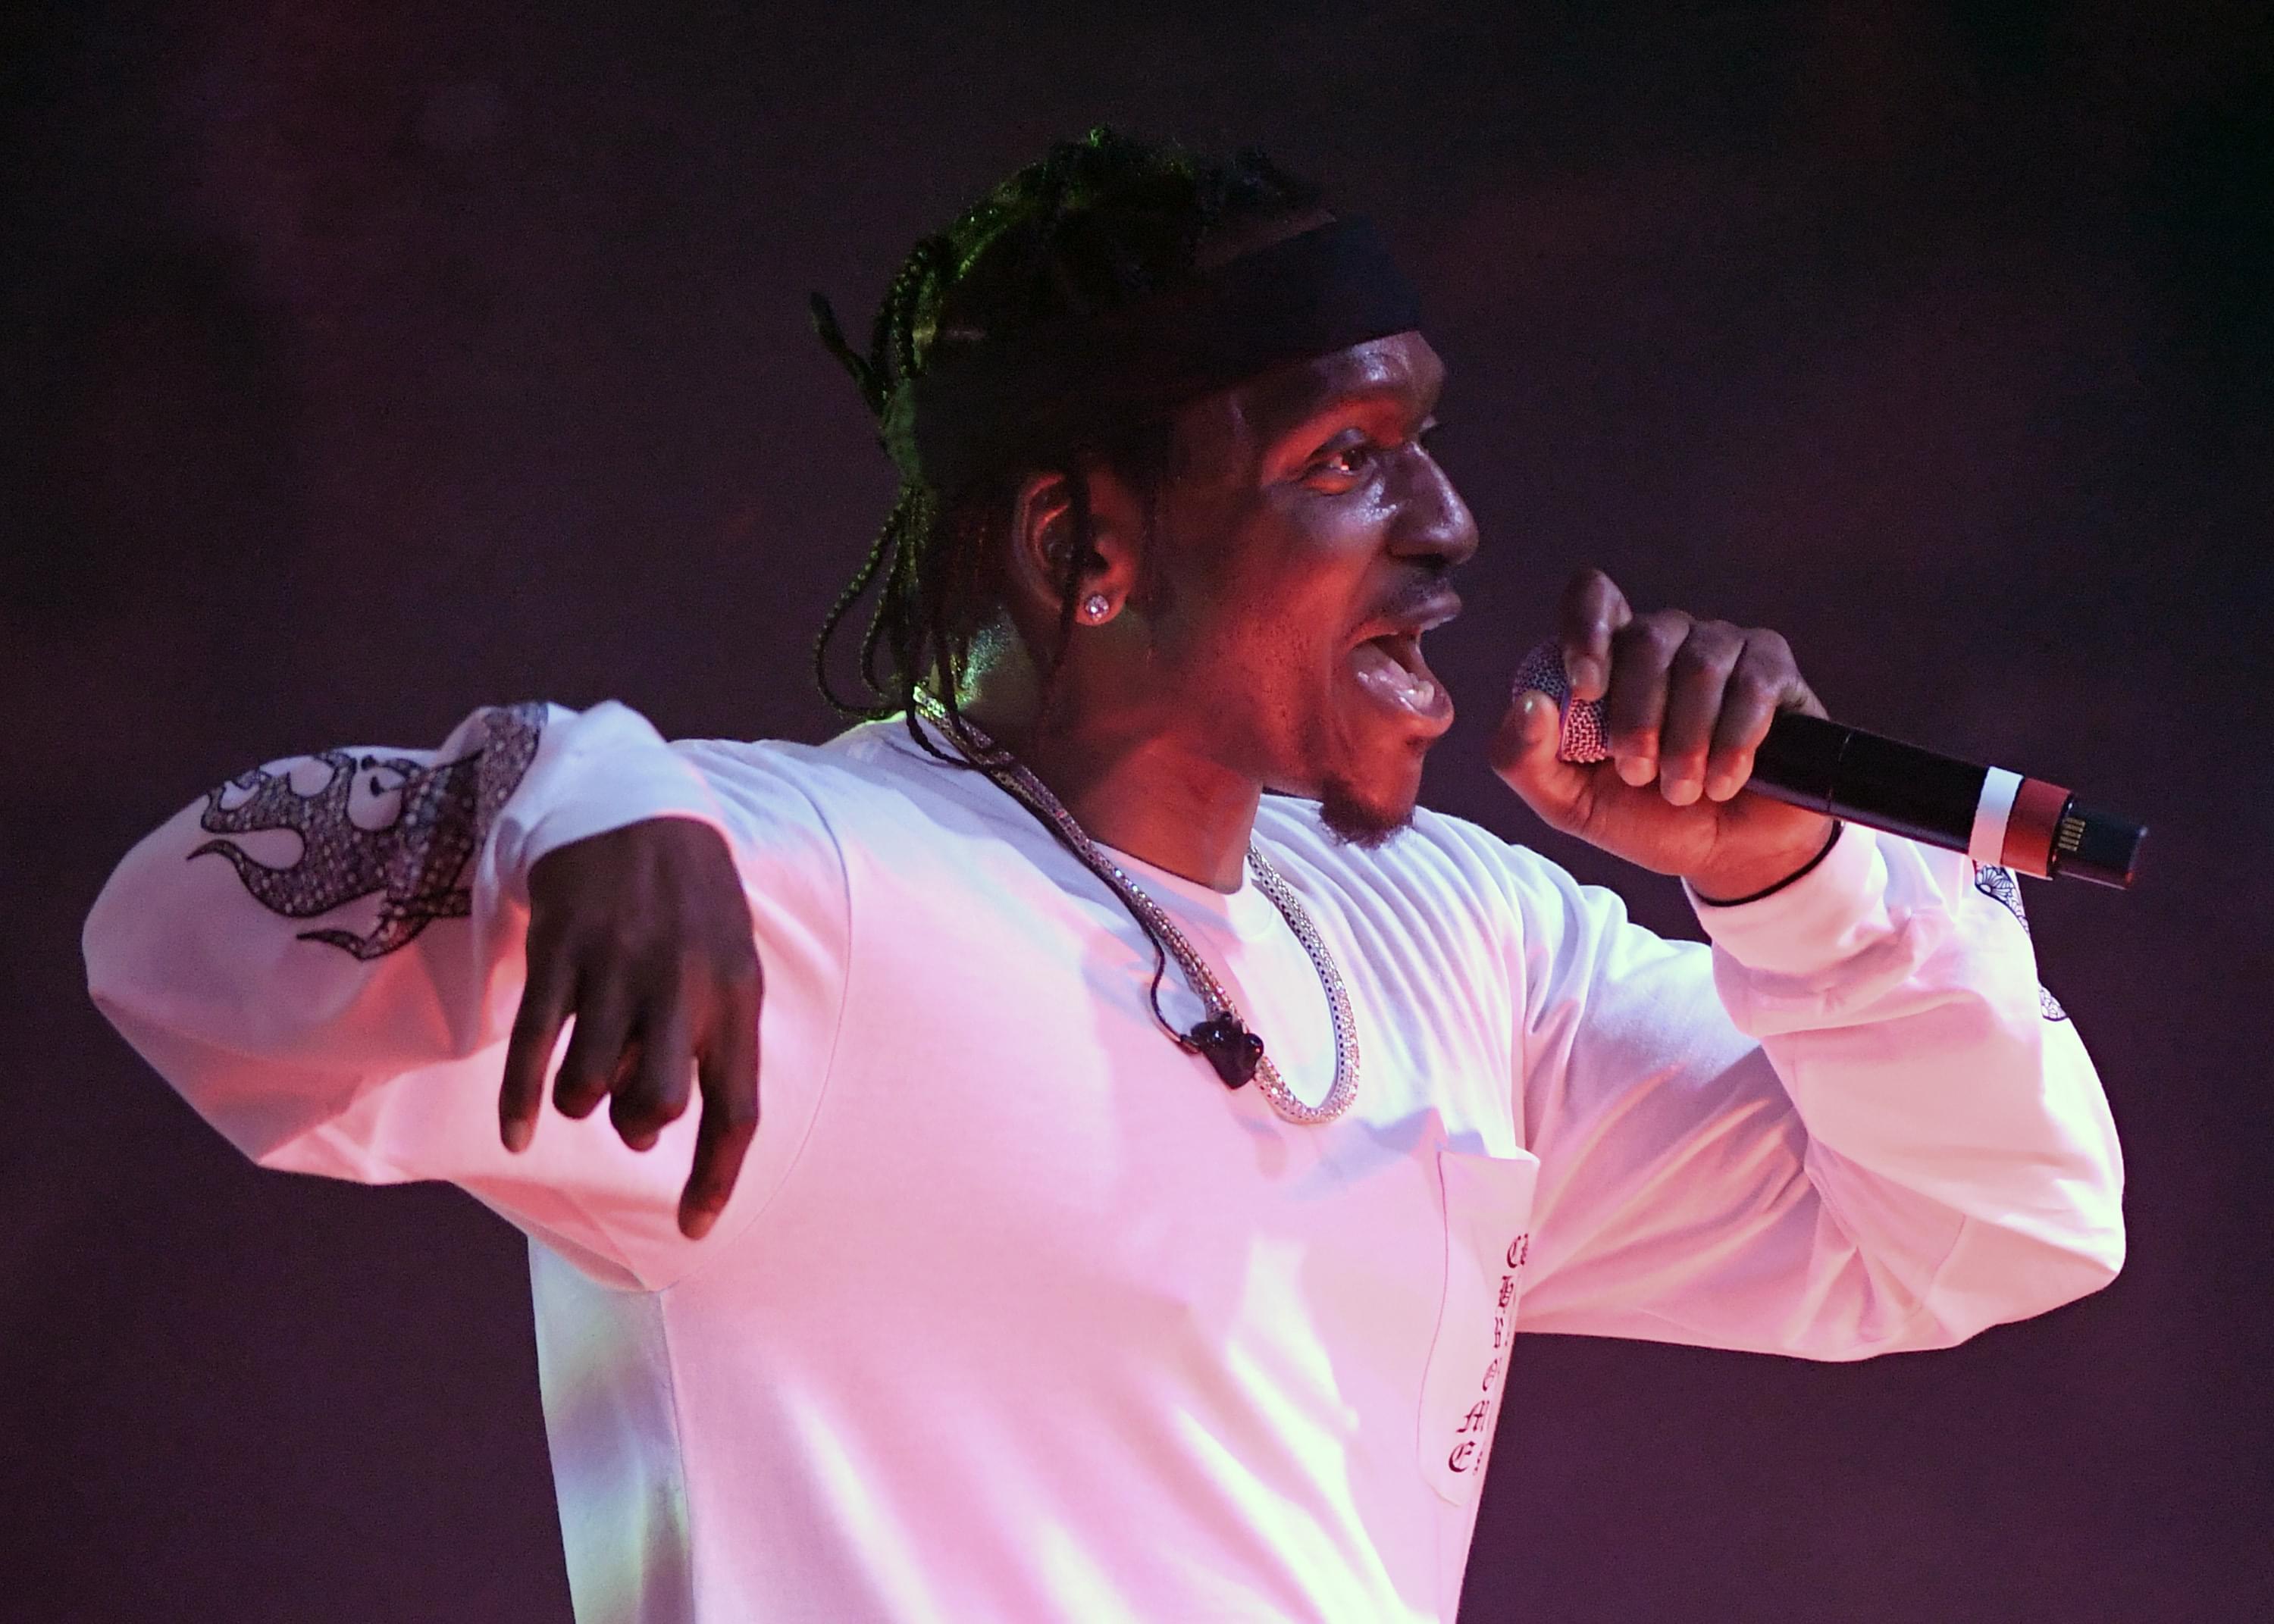 Pusha T Claims He Wasn’t Behind The “F**K DRAKE” Graphic At Camp Flognaw